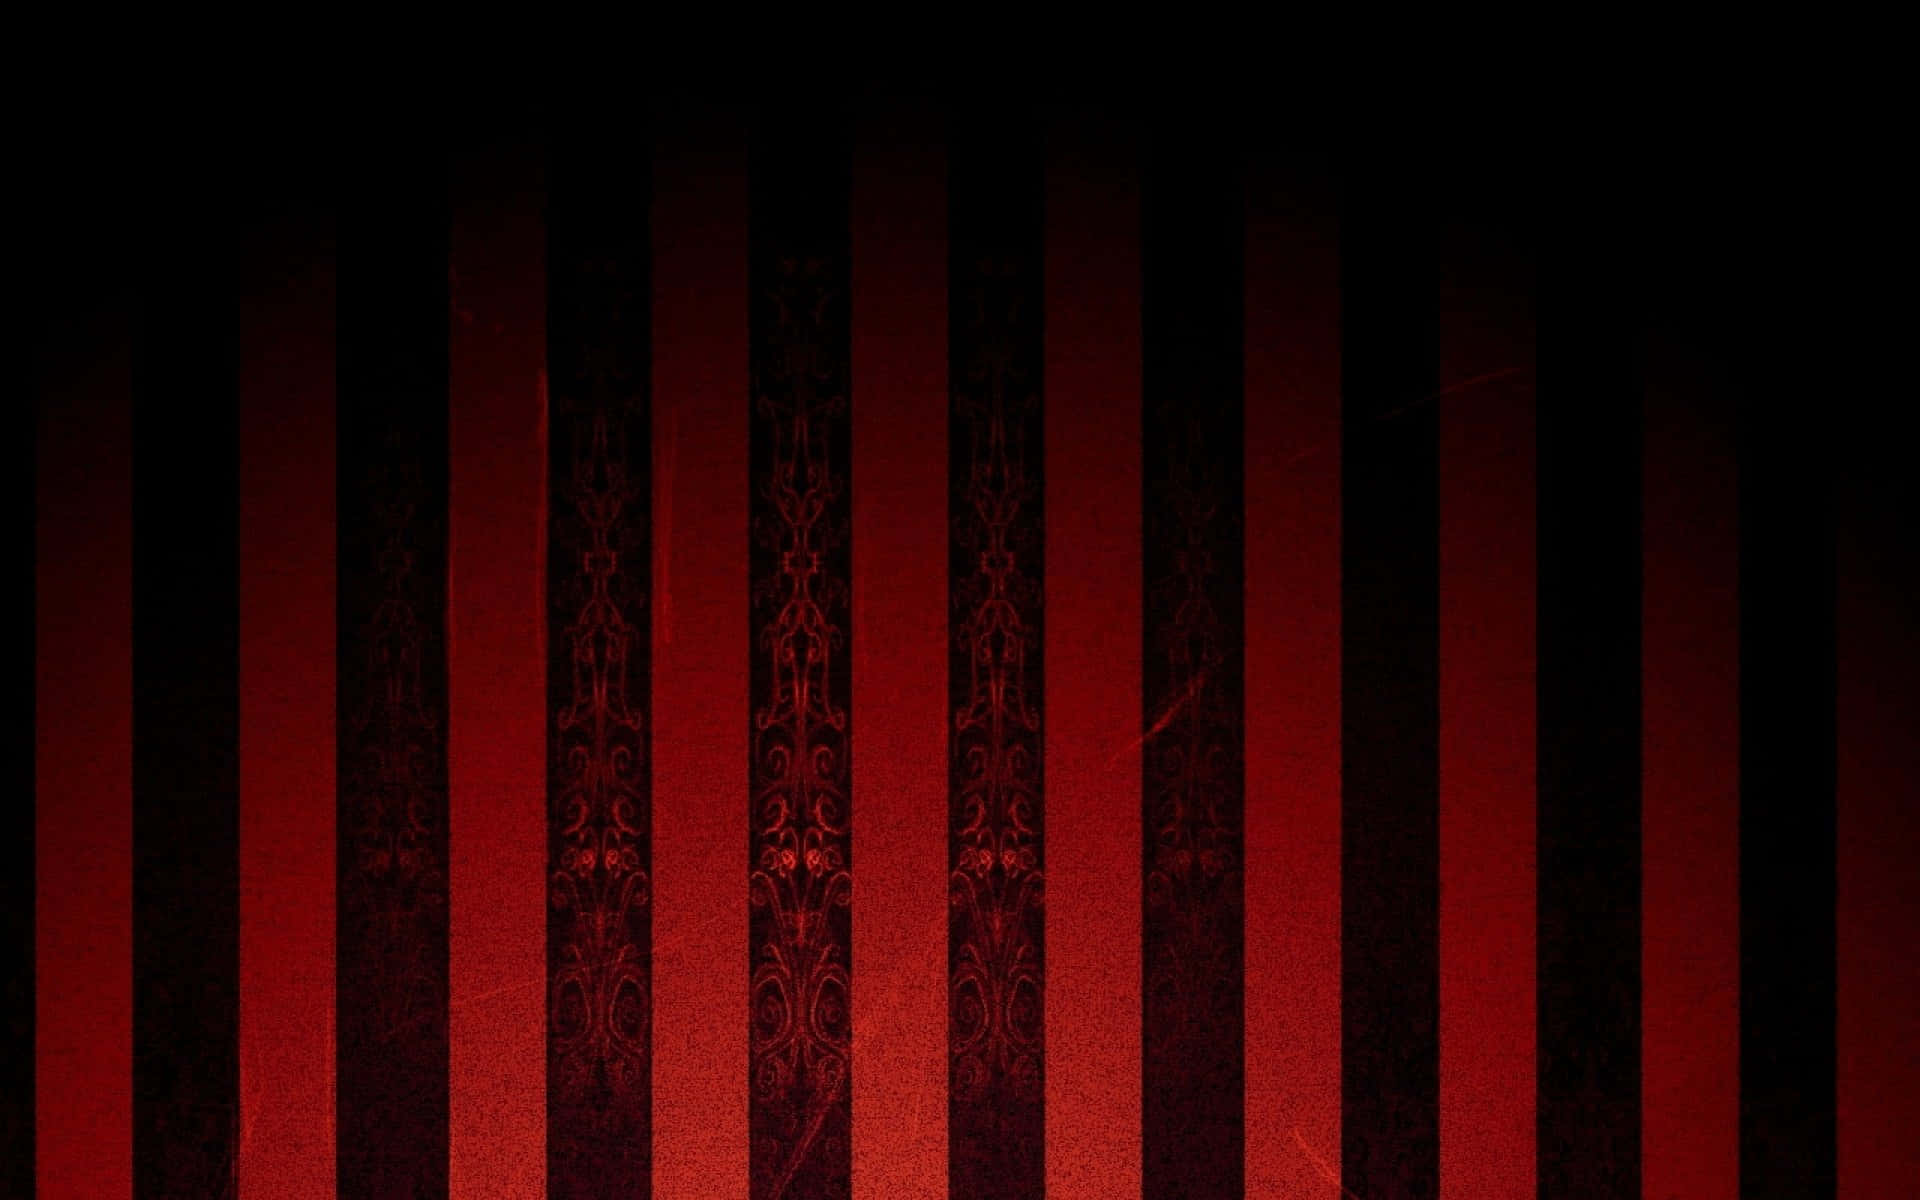 An Eye-Catching Black and Red Background